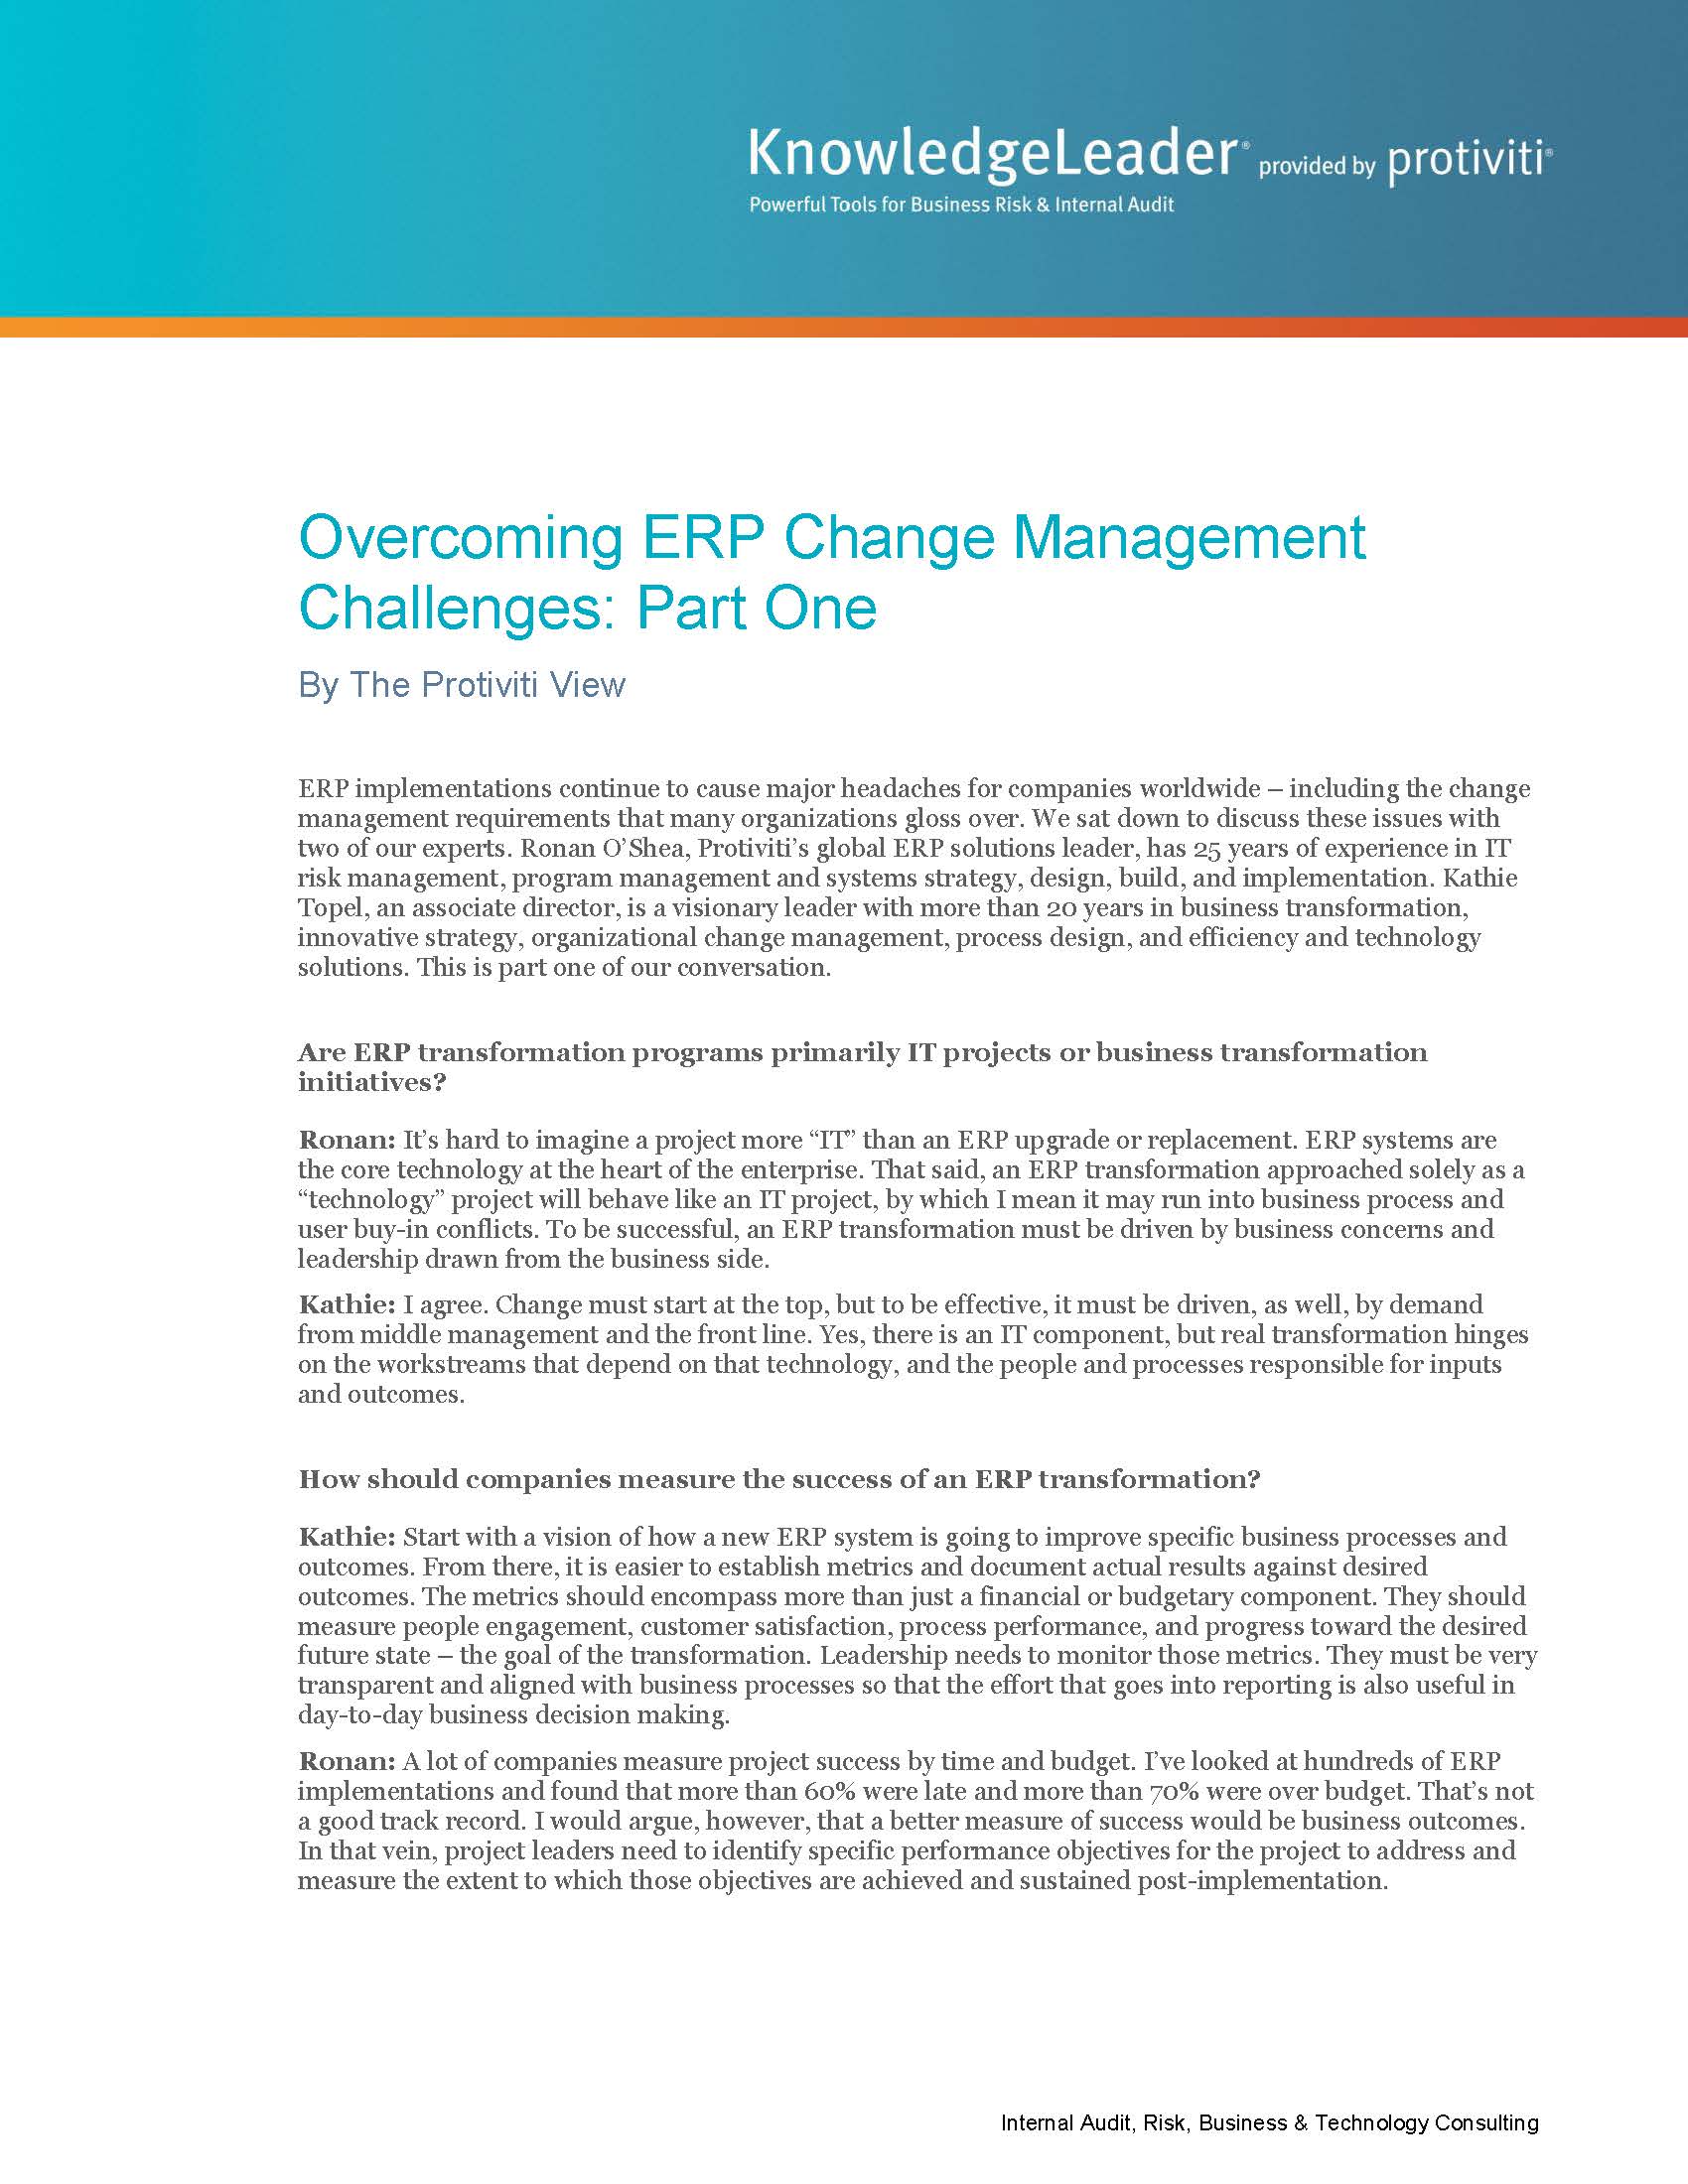 Screenshot of the first page of Overcoming ERP Change Management Challenges Part One